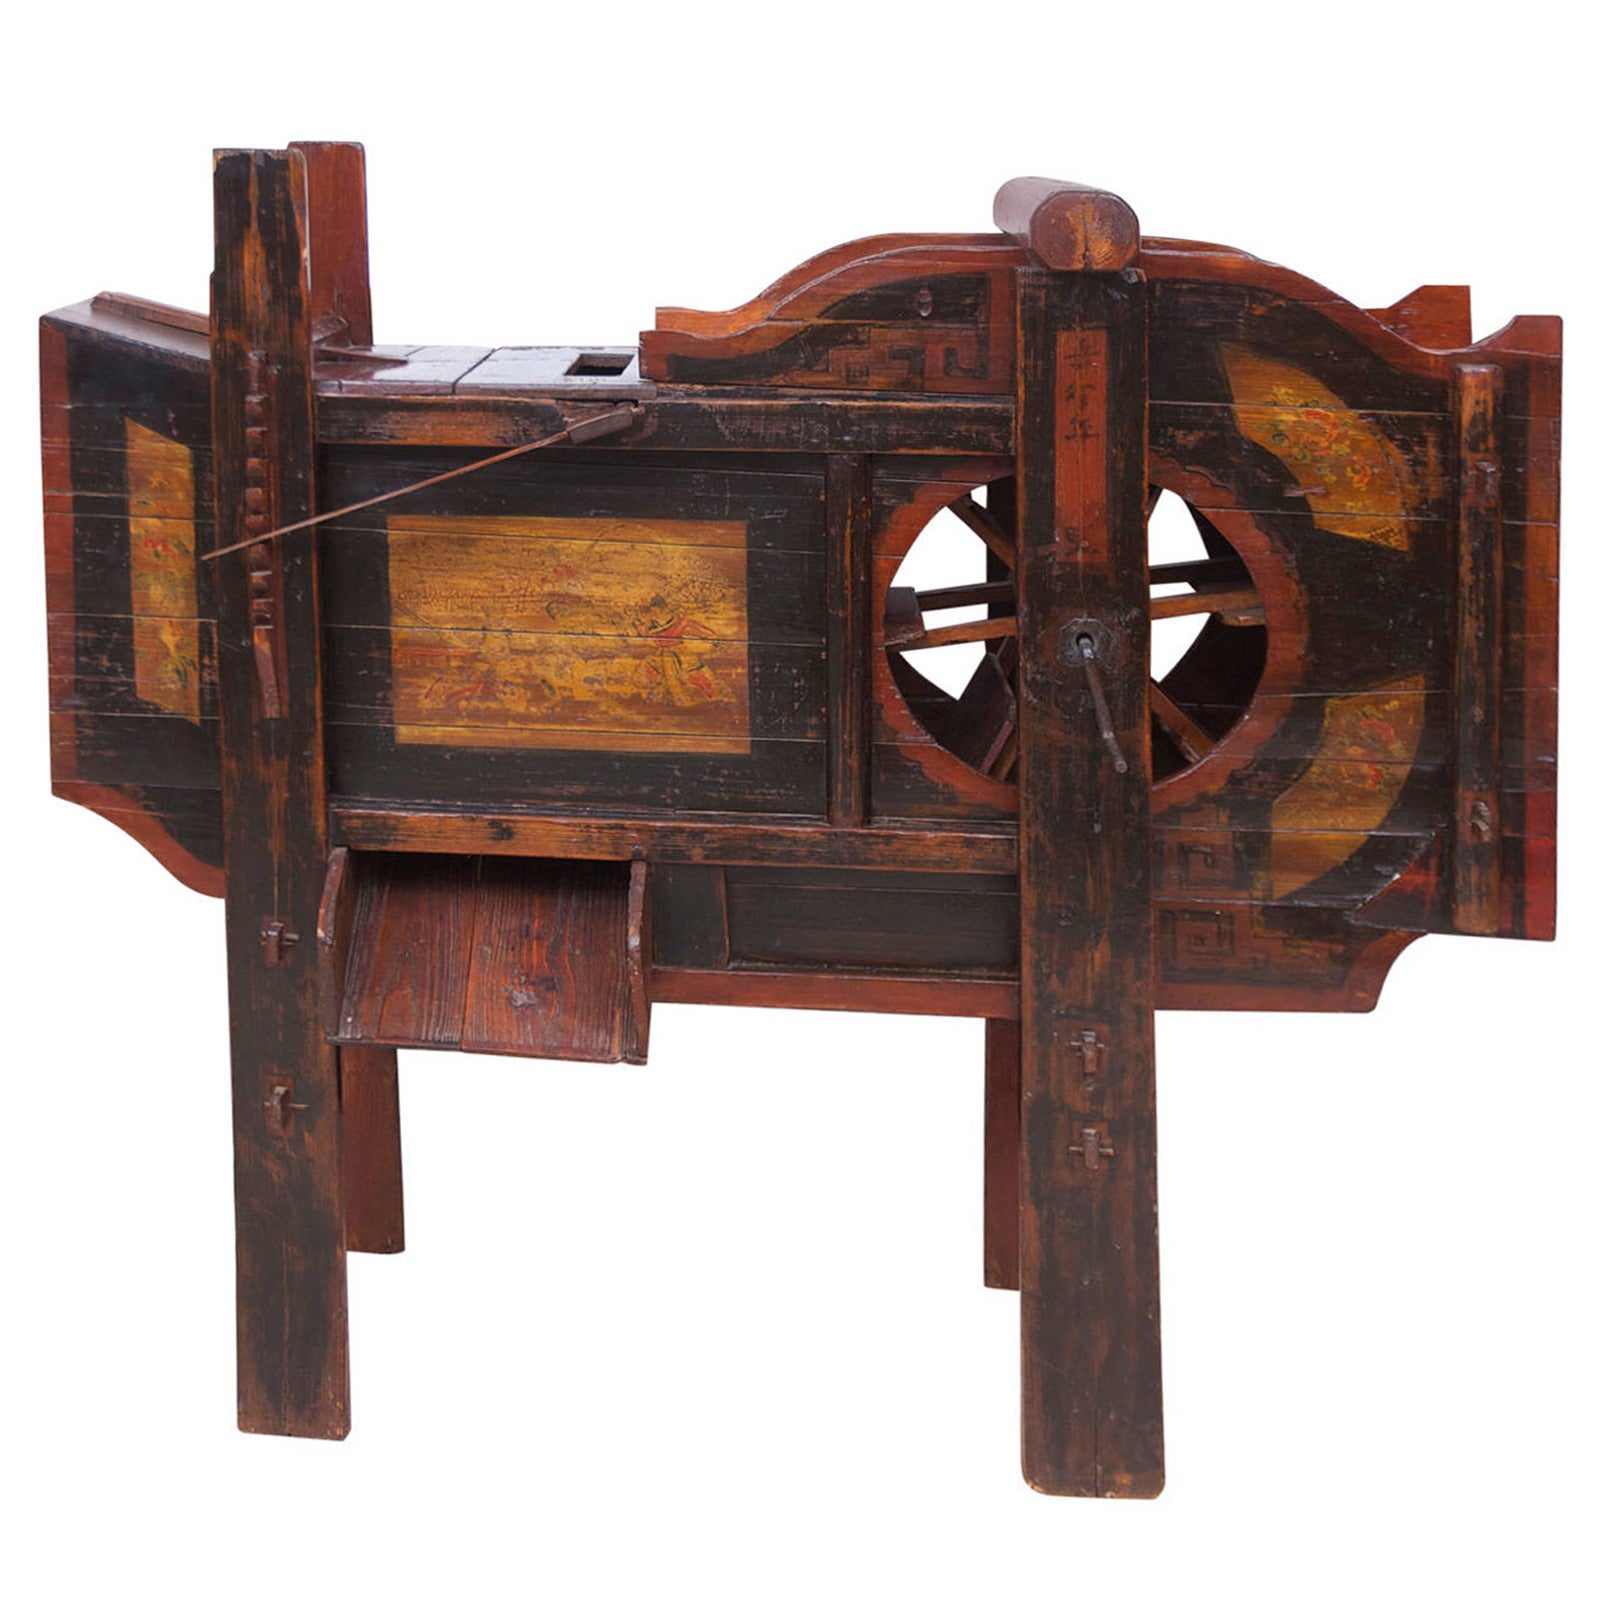 A rare and beautiful Chinese wind-winnowing machine for separating grain from chaff. This particular machine was used for rice. Made of wood with painted decorations in black, ochre and red, which include floral motif and scenes of Chinese life,